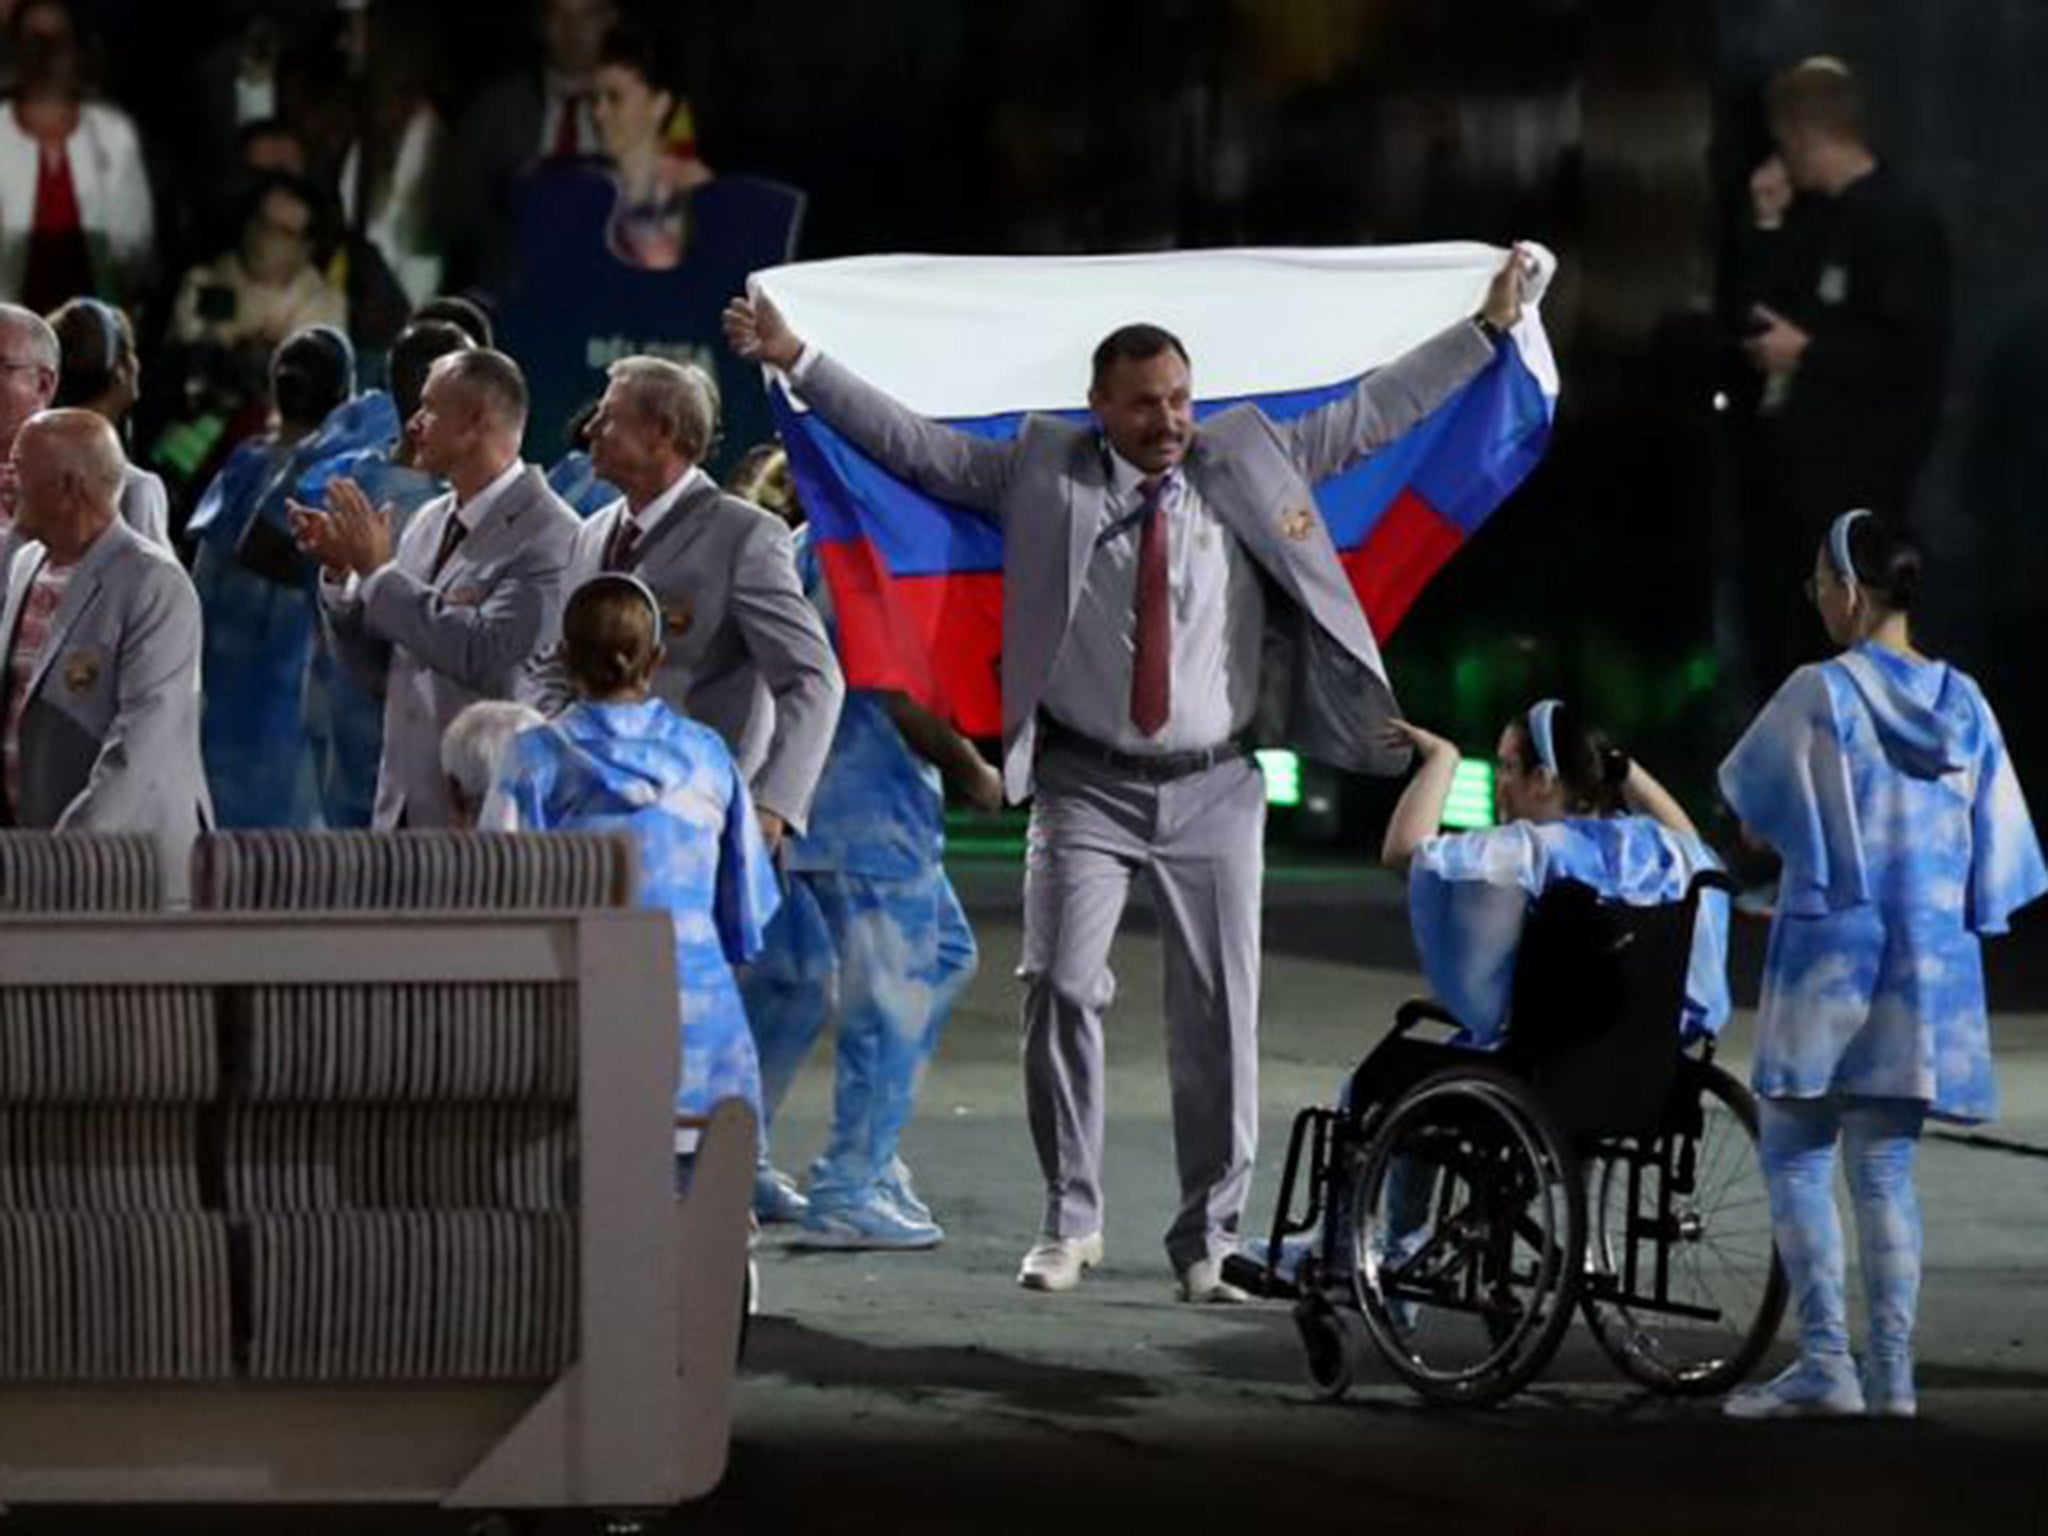 One member of the Belarus team carried out a pro-Russia protest during the Paralympic opening ceremony